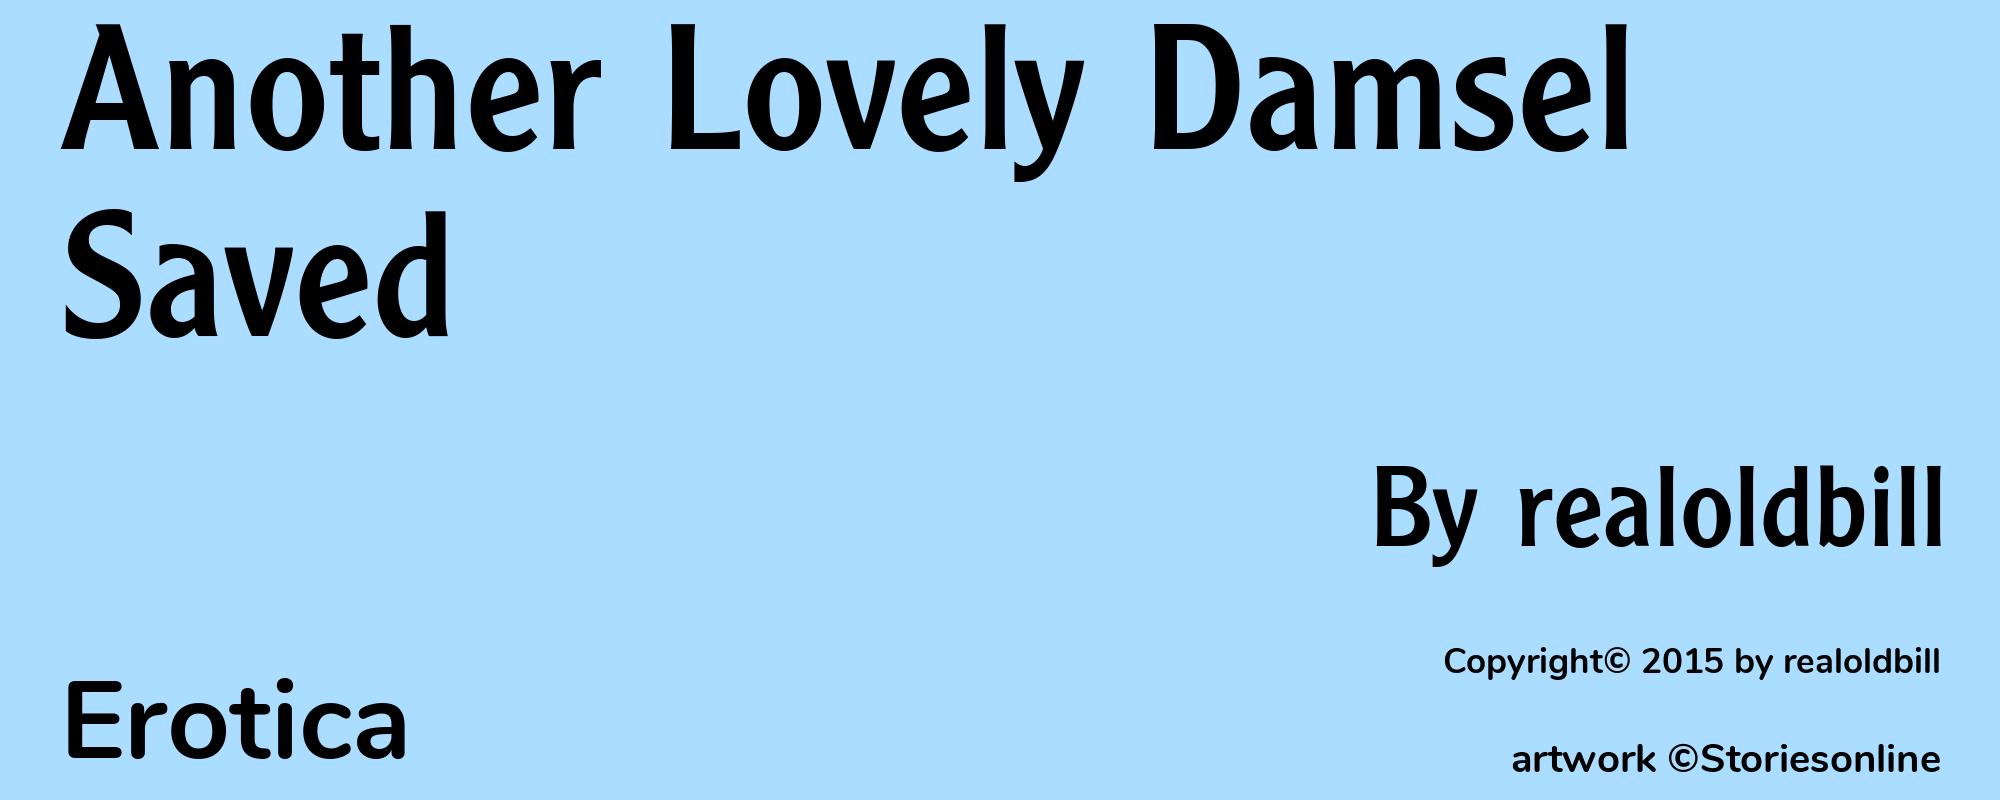 Another Lovely Damsel Saved - Cover